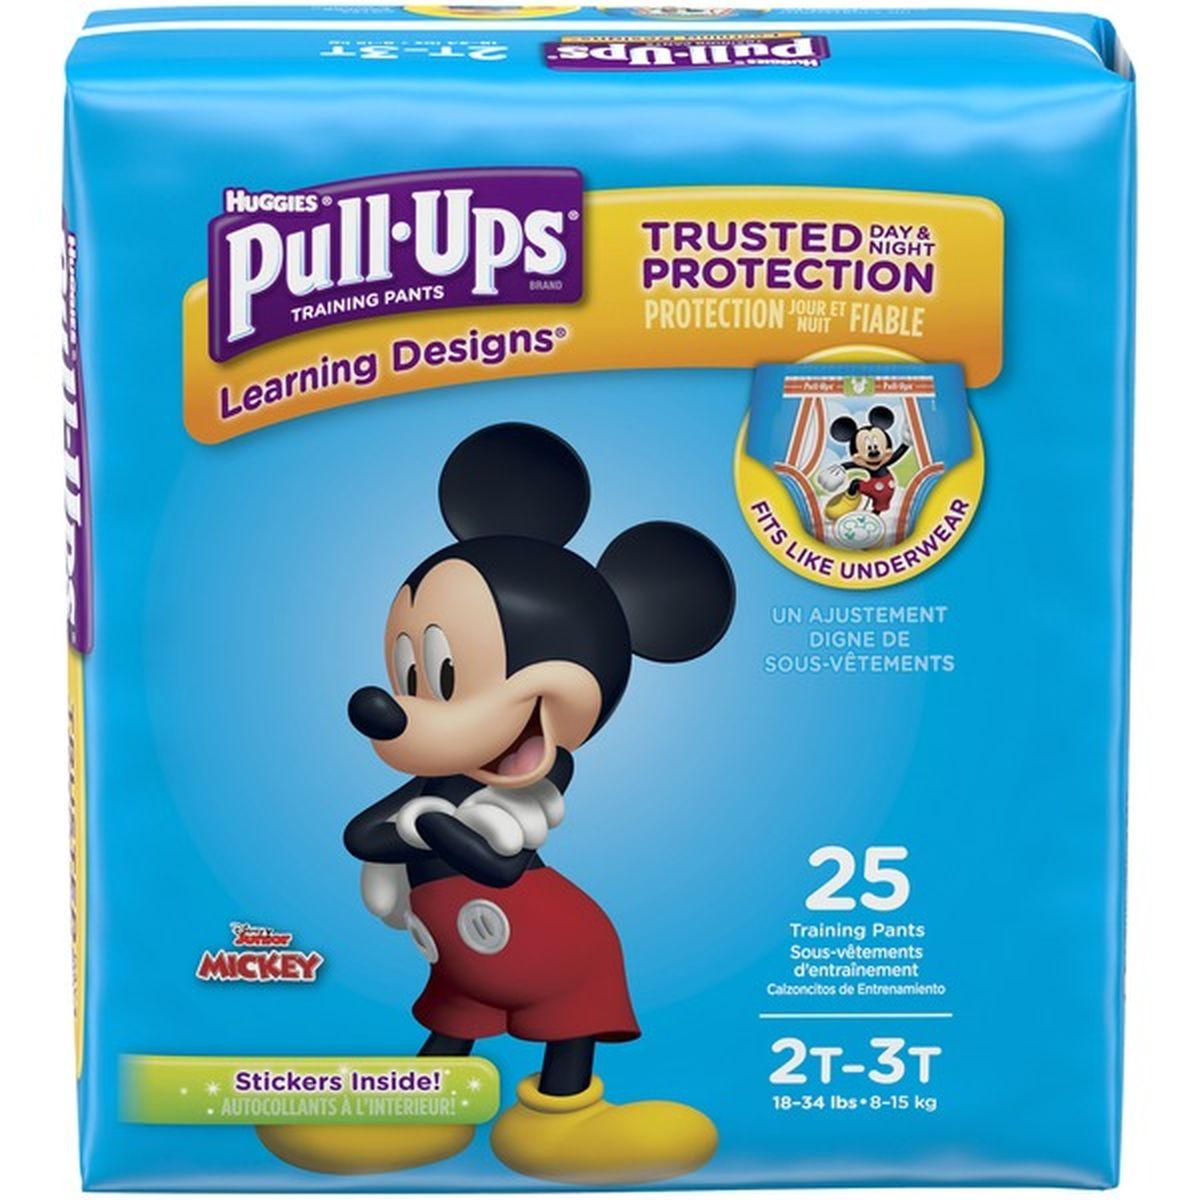 Pull-Ups Learning Designs Potty Training Pants for Boys, 2T-3T (18